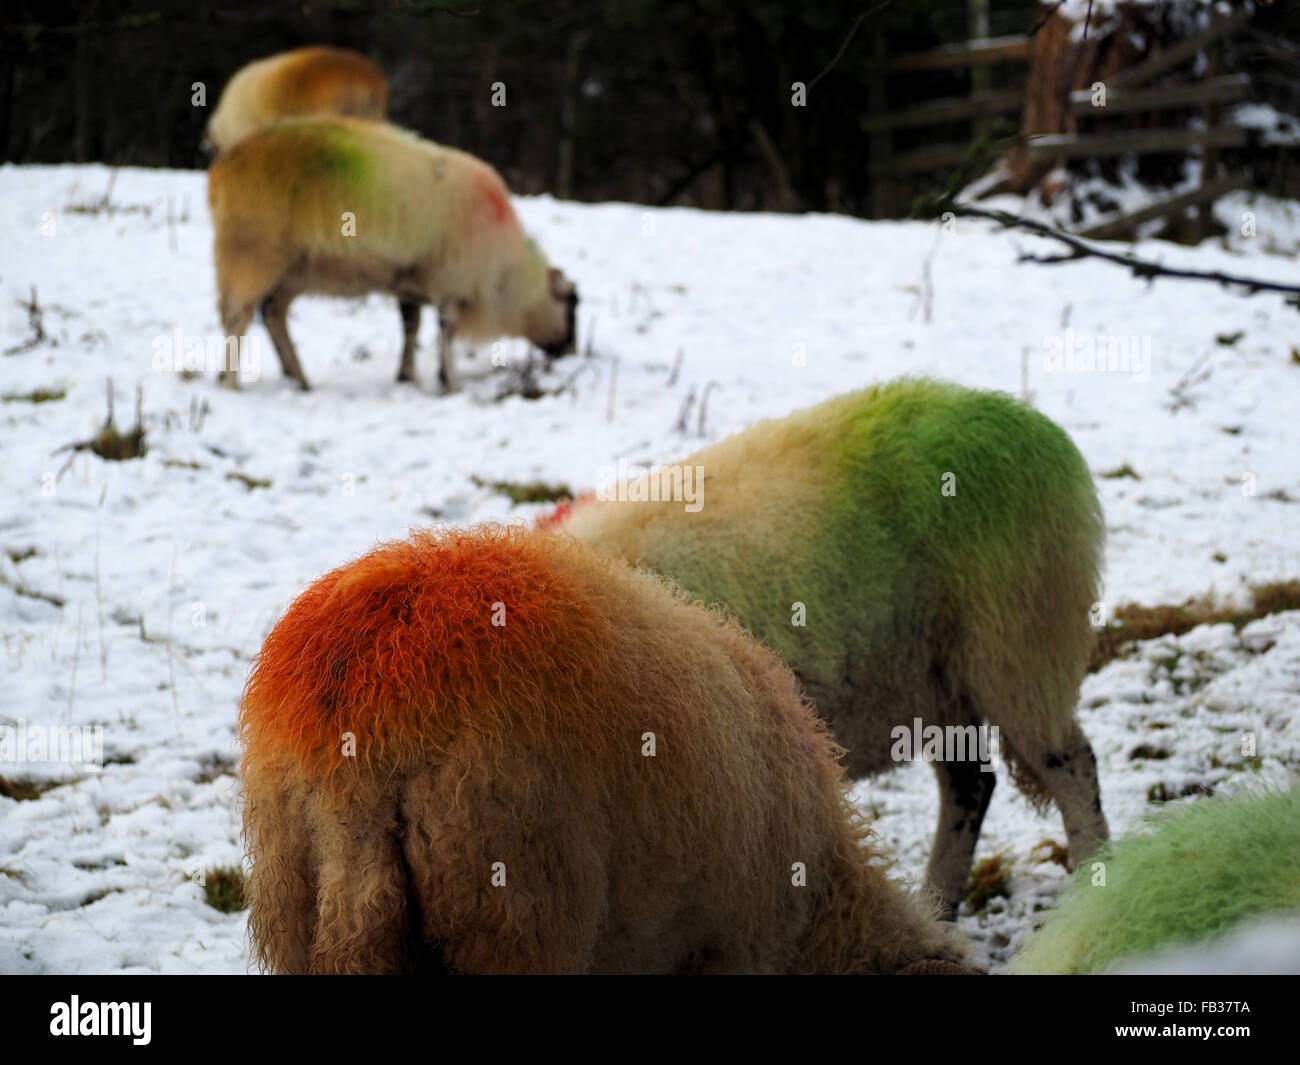 sheep in snowy field with bright red and green dye on woollen coats after tupping Stock Photo